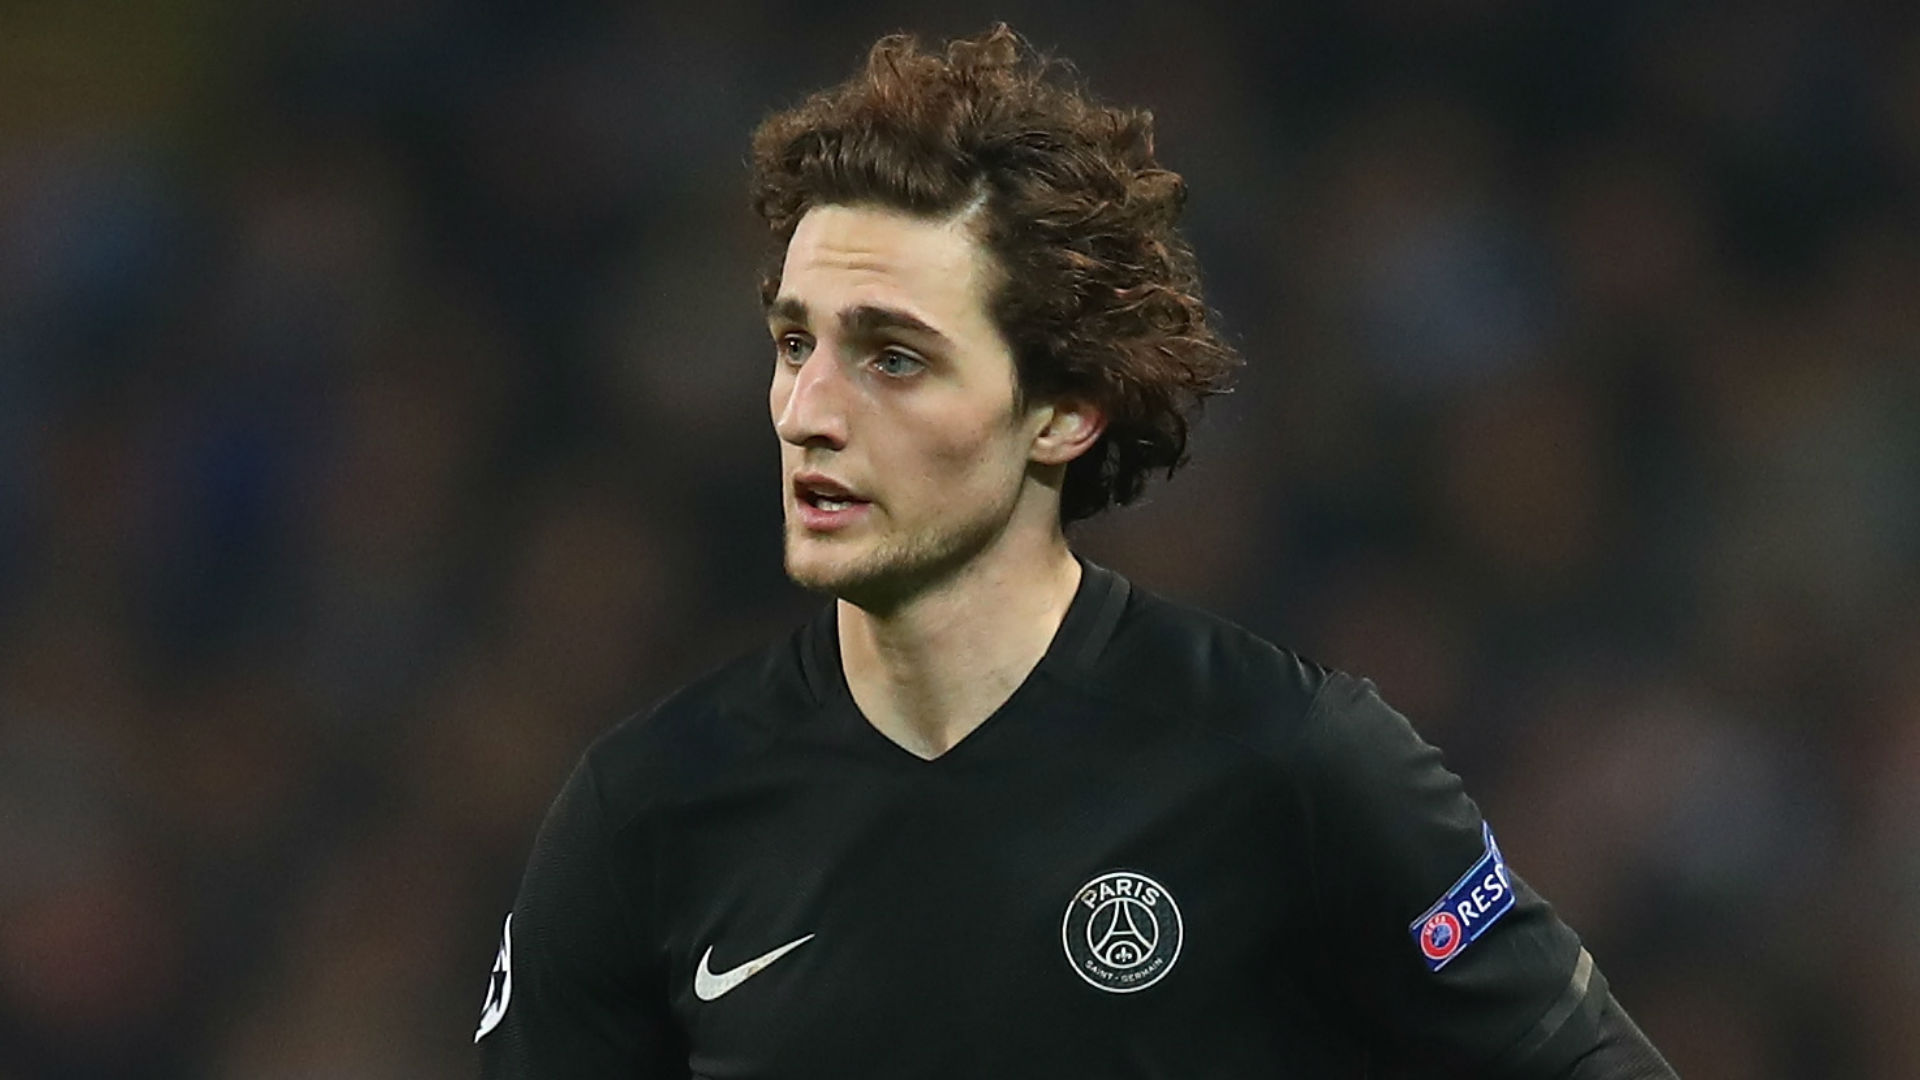 France midfielder Adrien Rabiot has been ruled out of contention as Paris Saint-Germain prepare to face Guingamp on Saturday.